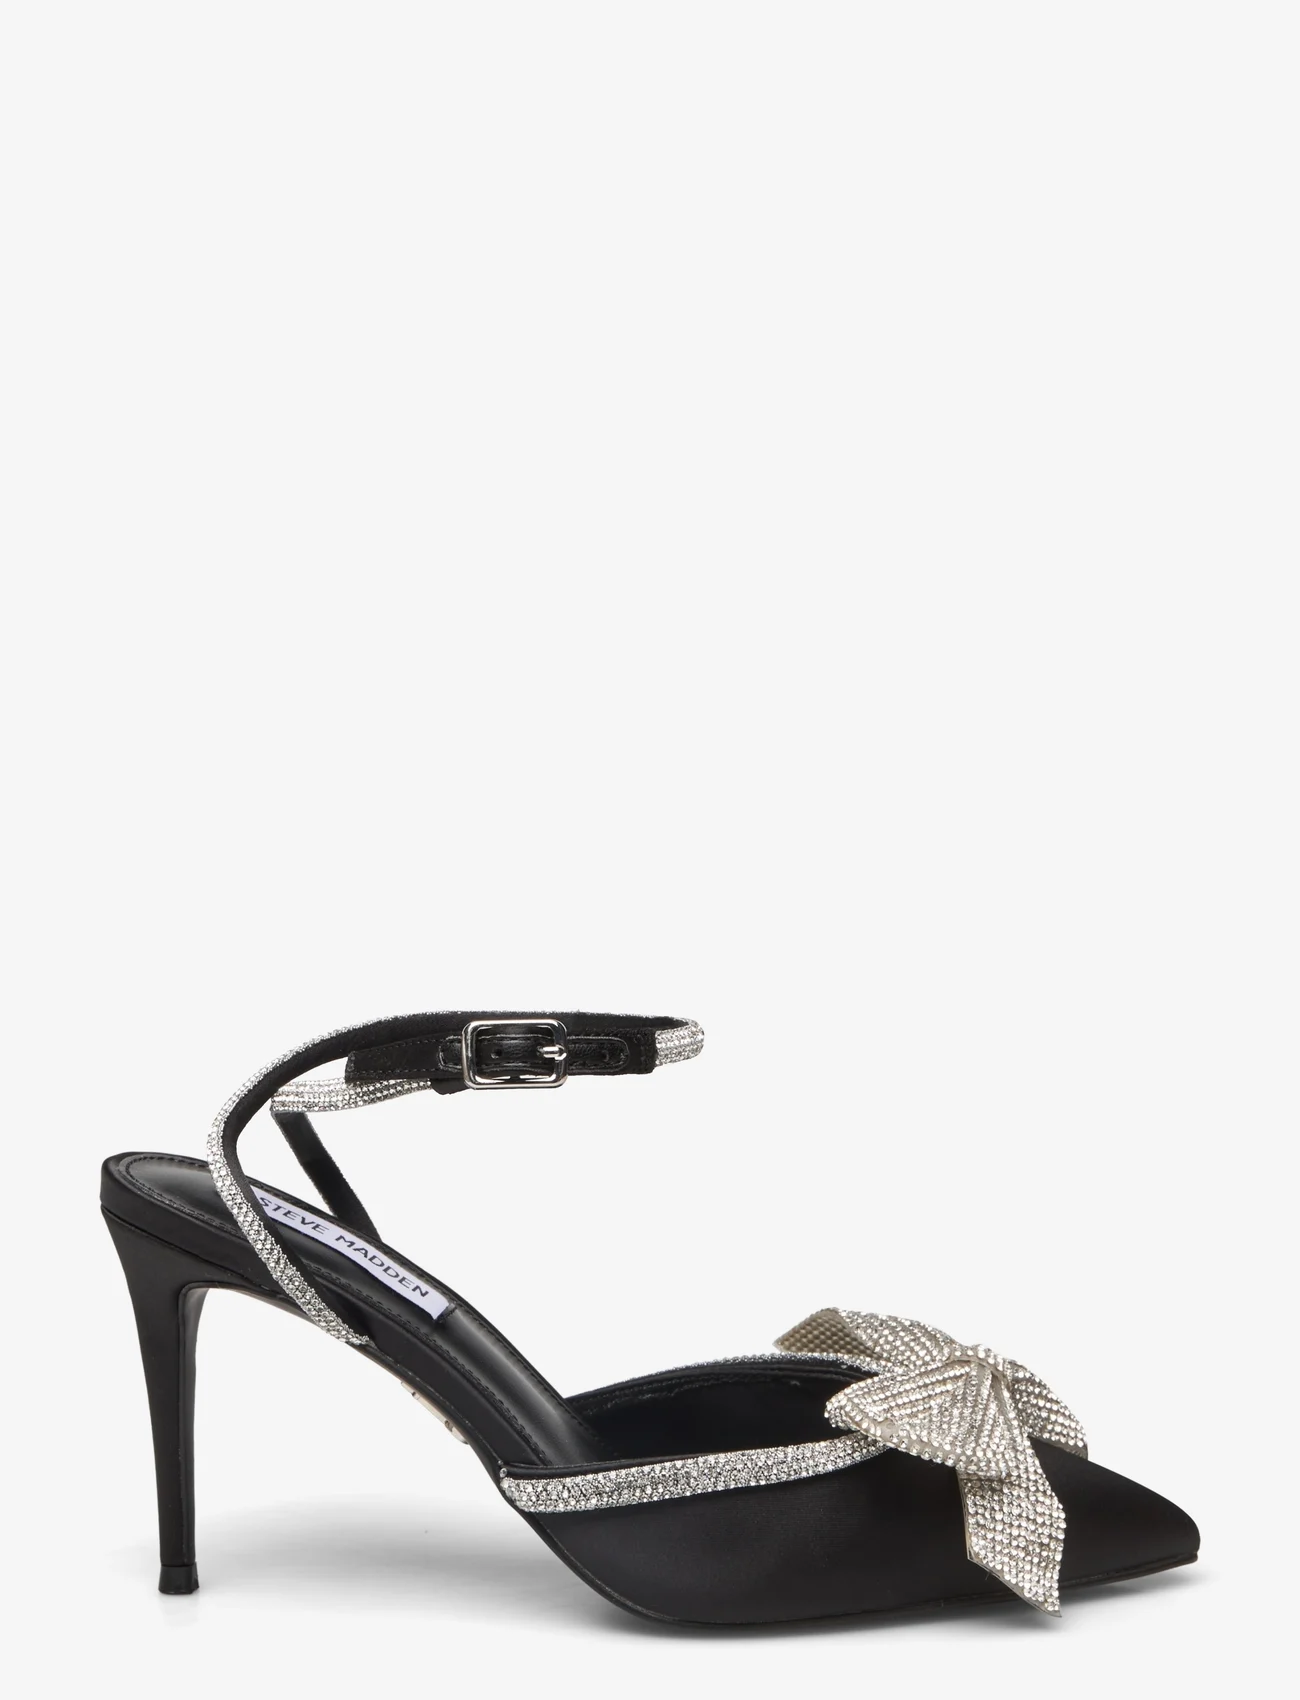 Steve Madden - Luminoso Sandal - party wear at outlet prices - black satin - 1